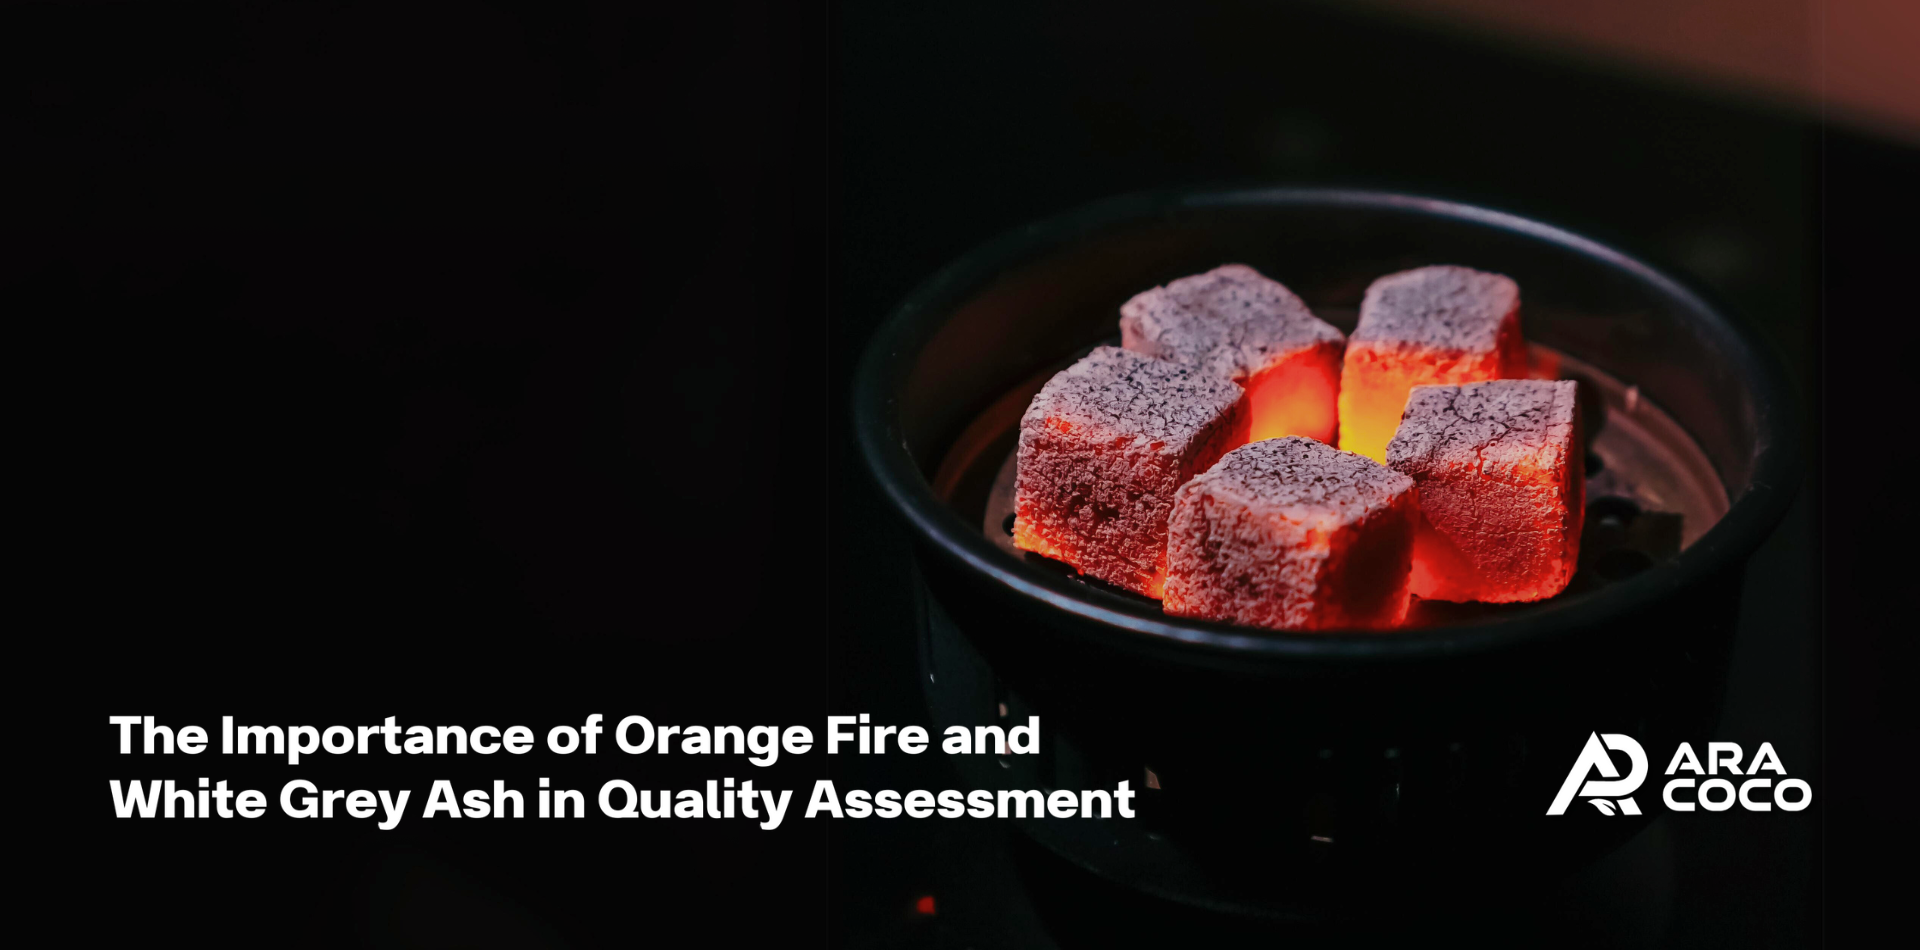 The Importance of Orange Fire and White Grey Ash in Quality Assessment